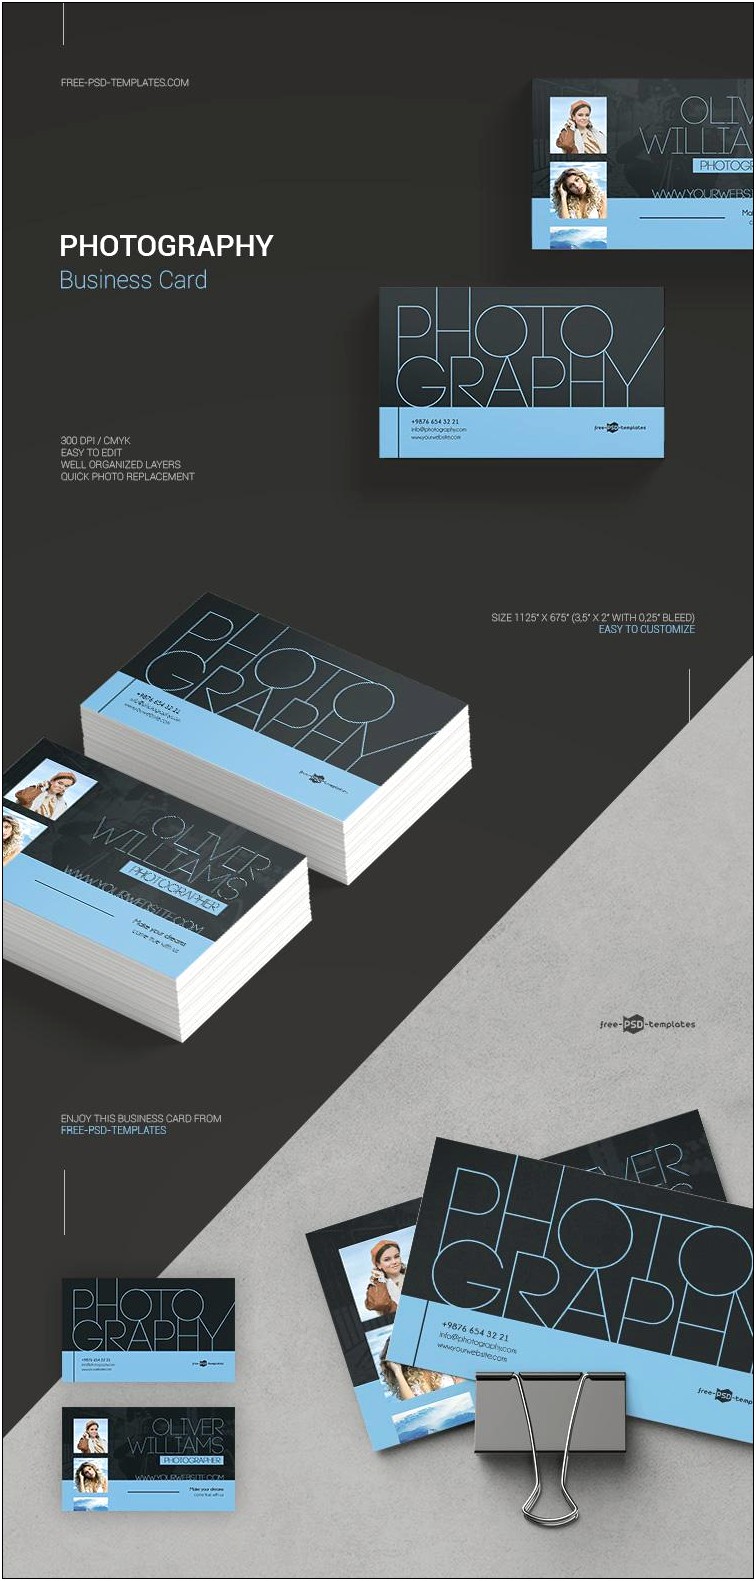 Free Photography Business Card Template Photoshop